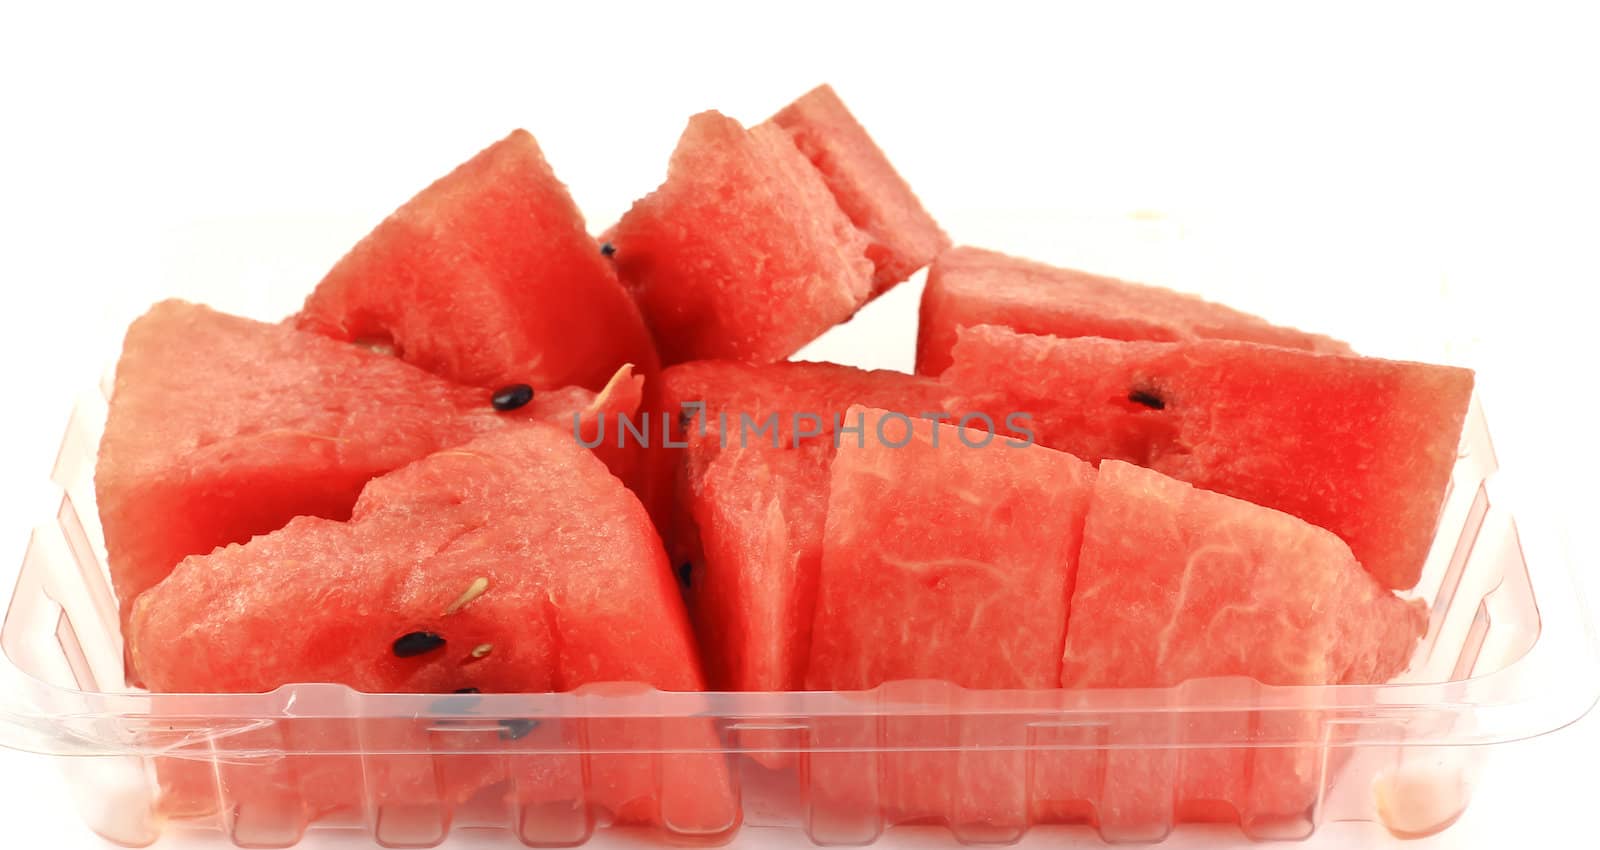 Watermelon by Photoguide